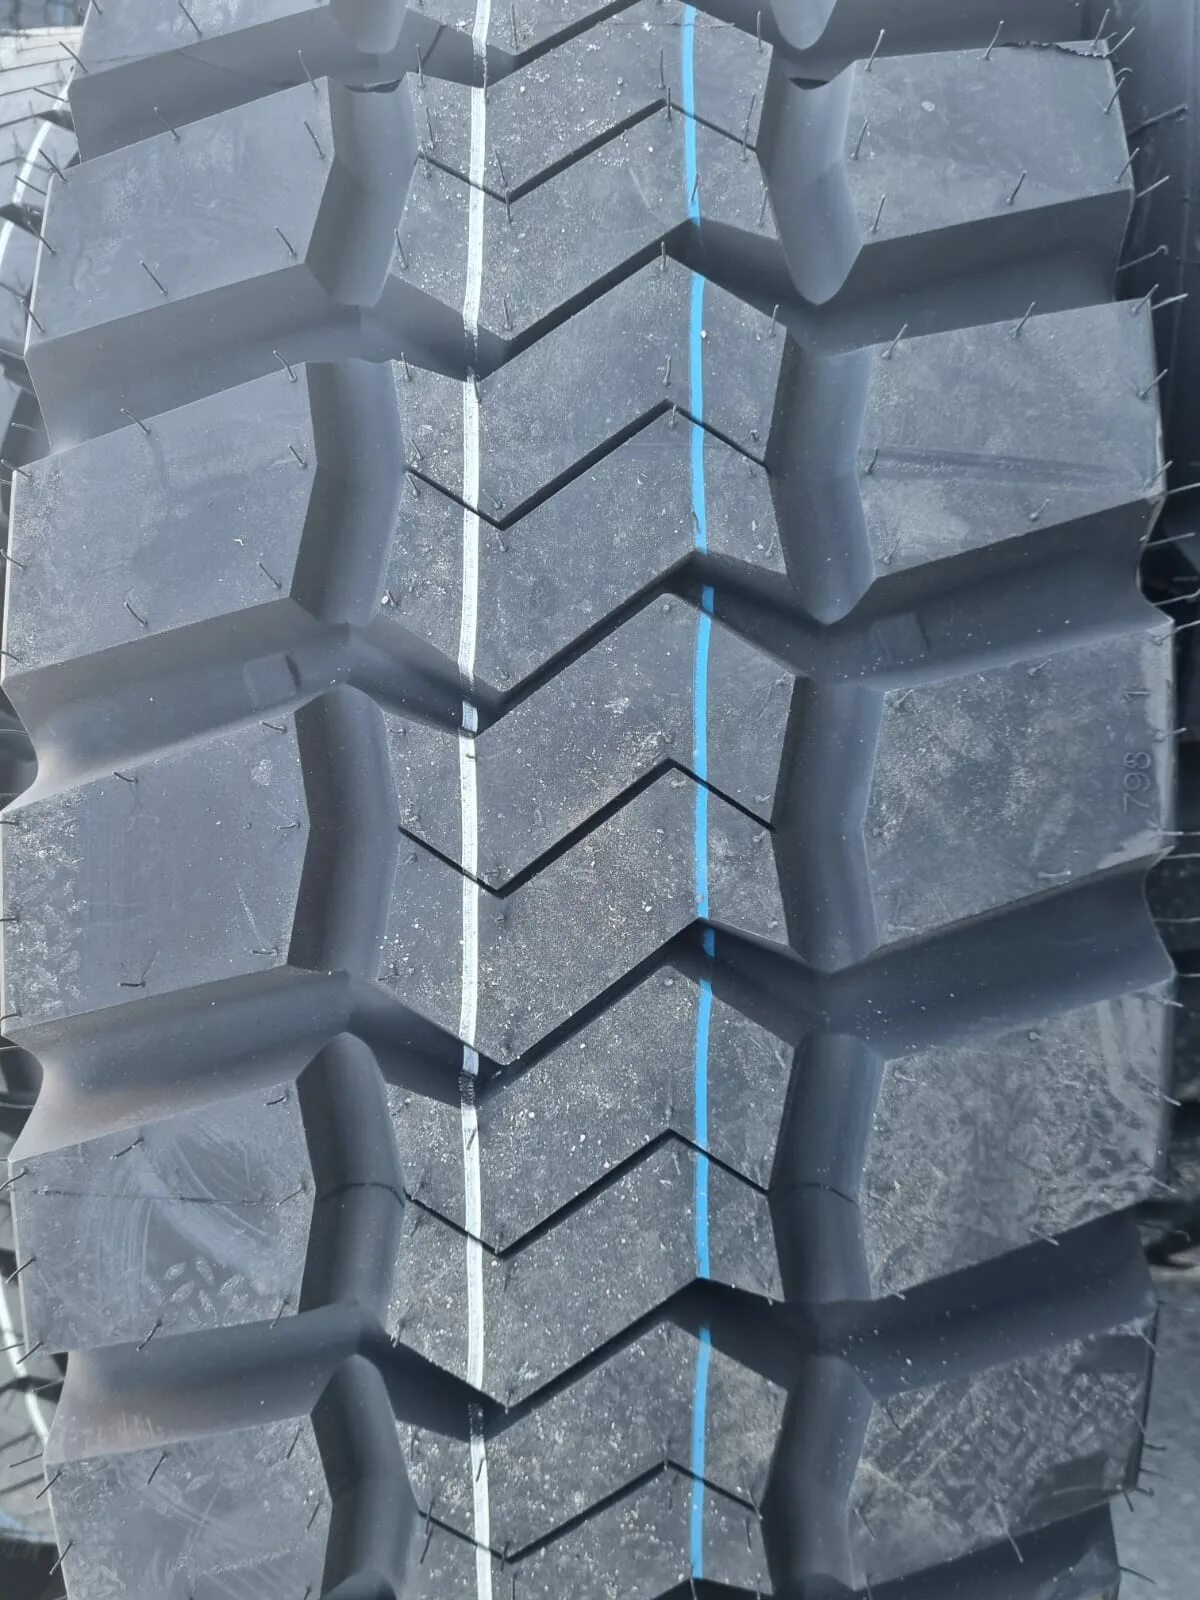 Кама 315/80 r22.5. 315/80r22.5 Кама Forza or a. Кама 315/80r22.5 Кама Forza Mix a 156/150k TL. 315/80r22.5 Кама Forza or a 156/150f TL.